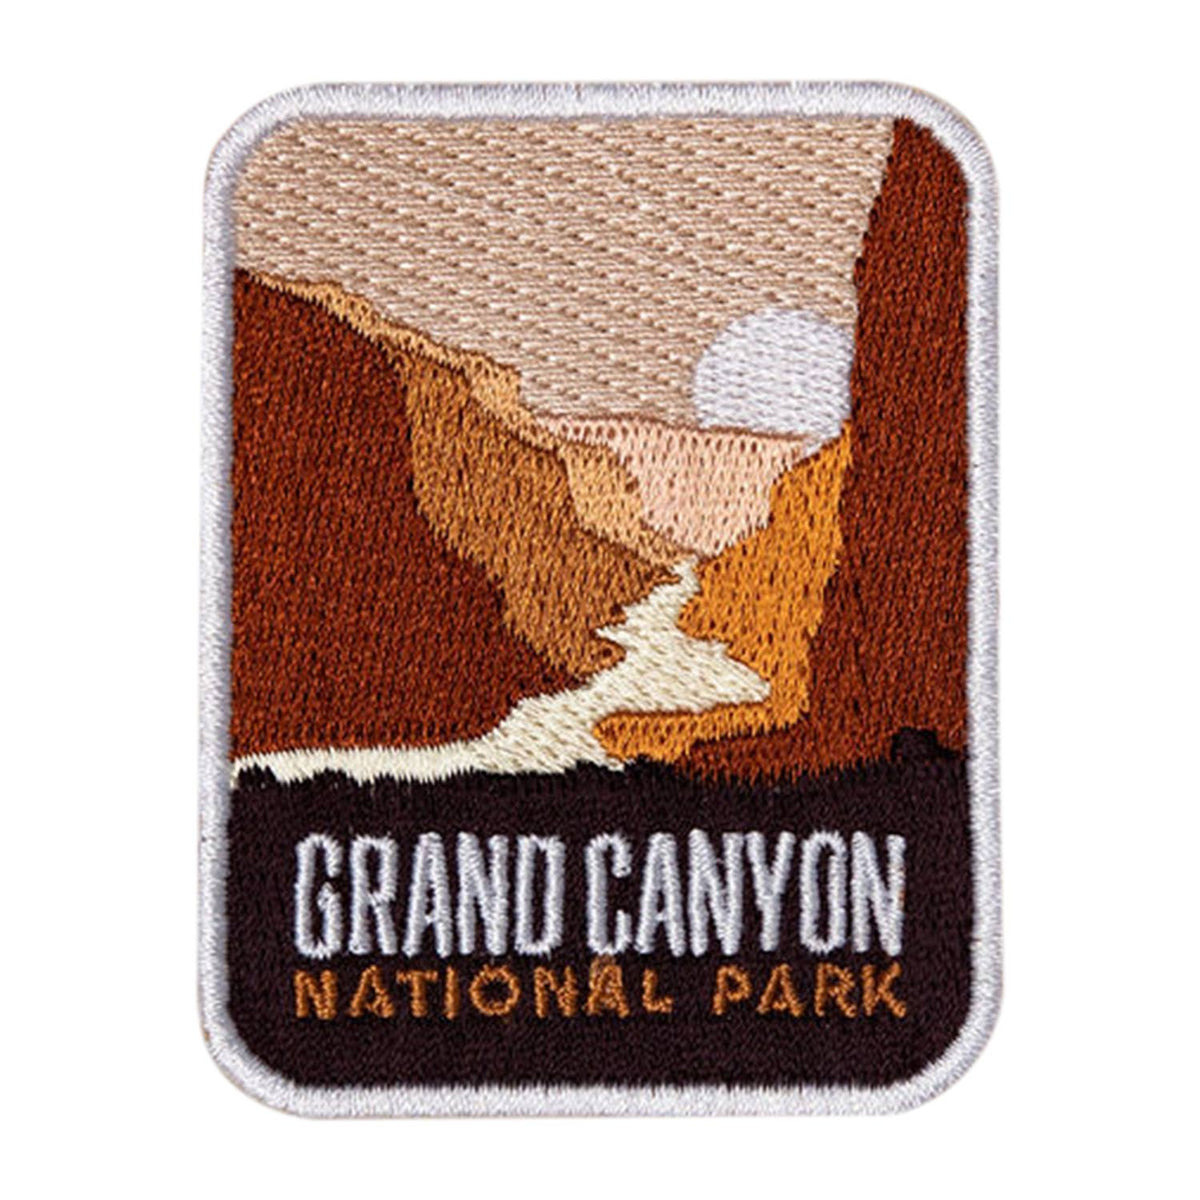 Grand Canyon National Park Iron-on Patch